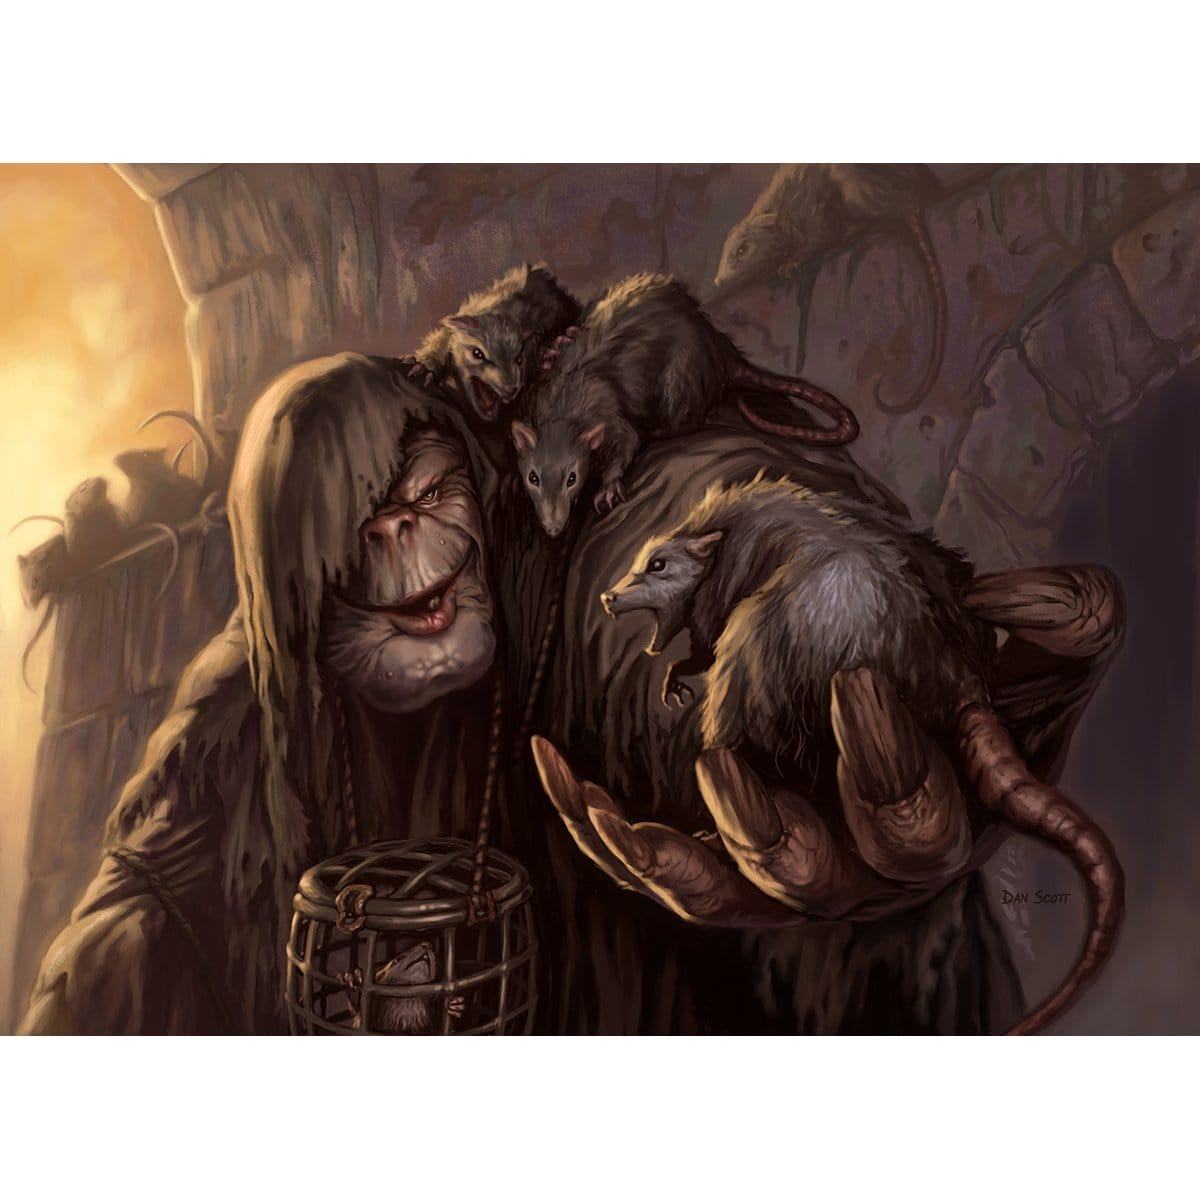 Rat Catcher Print - Print - Original Magic Art - Accessories for Magic the Gathering and other card games